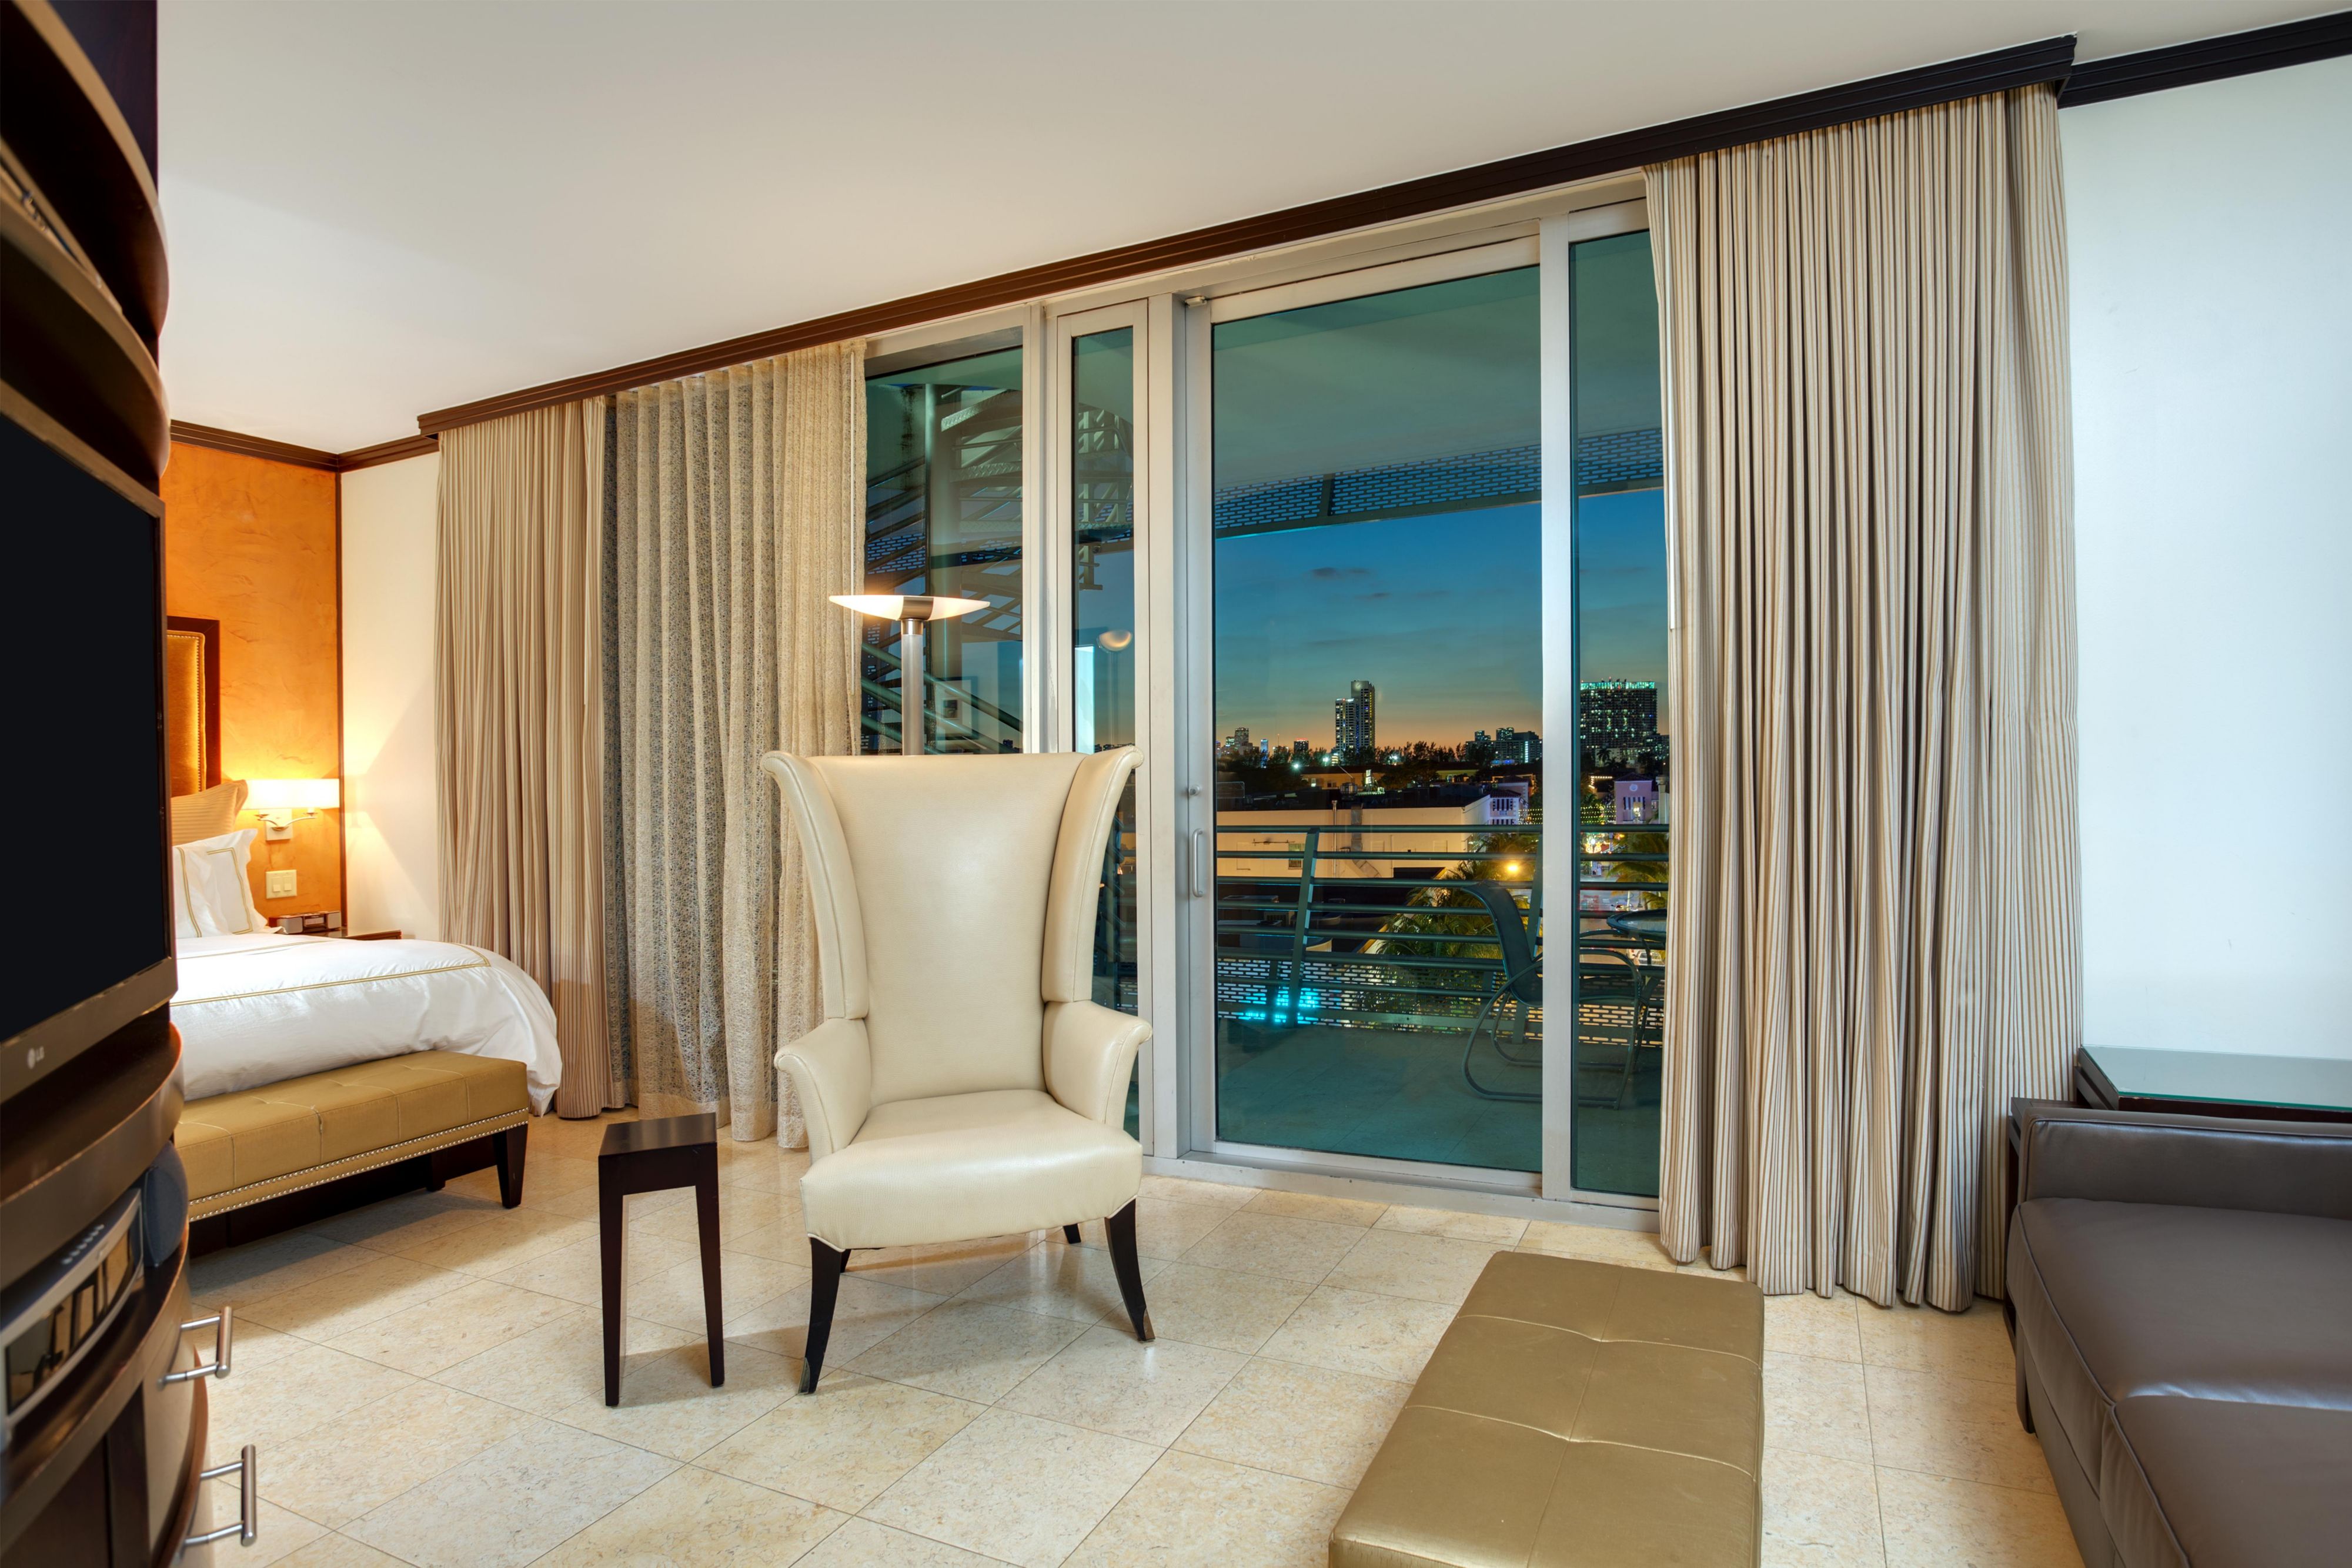 Rooms with Gorgeous City Views